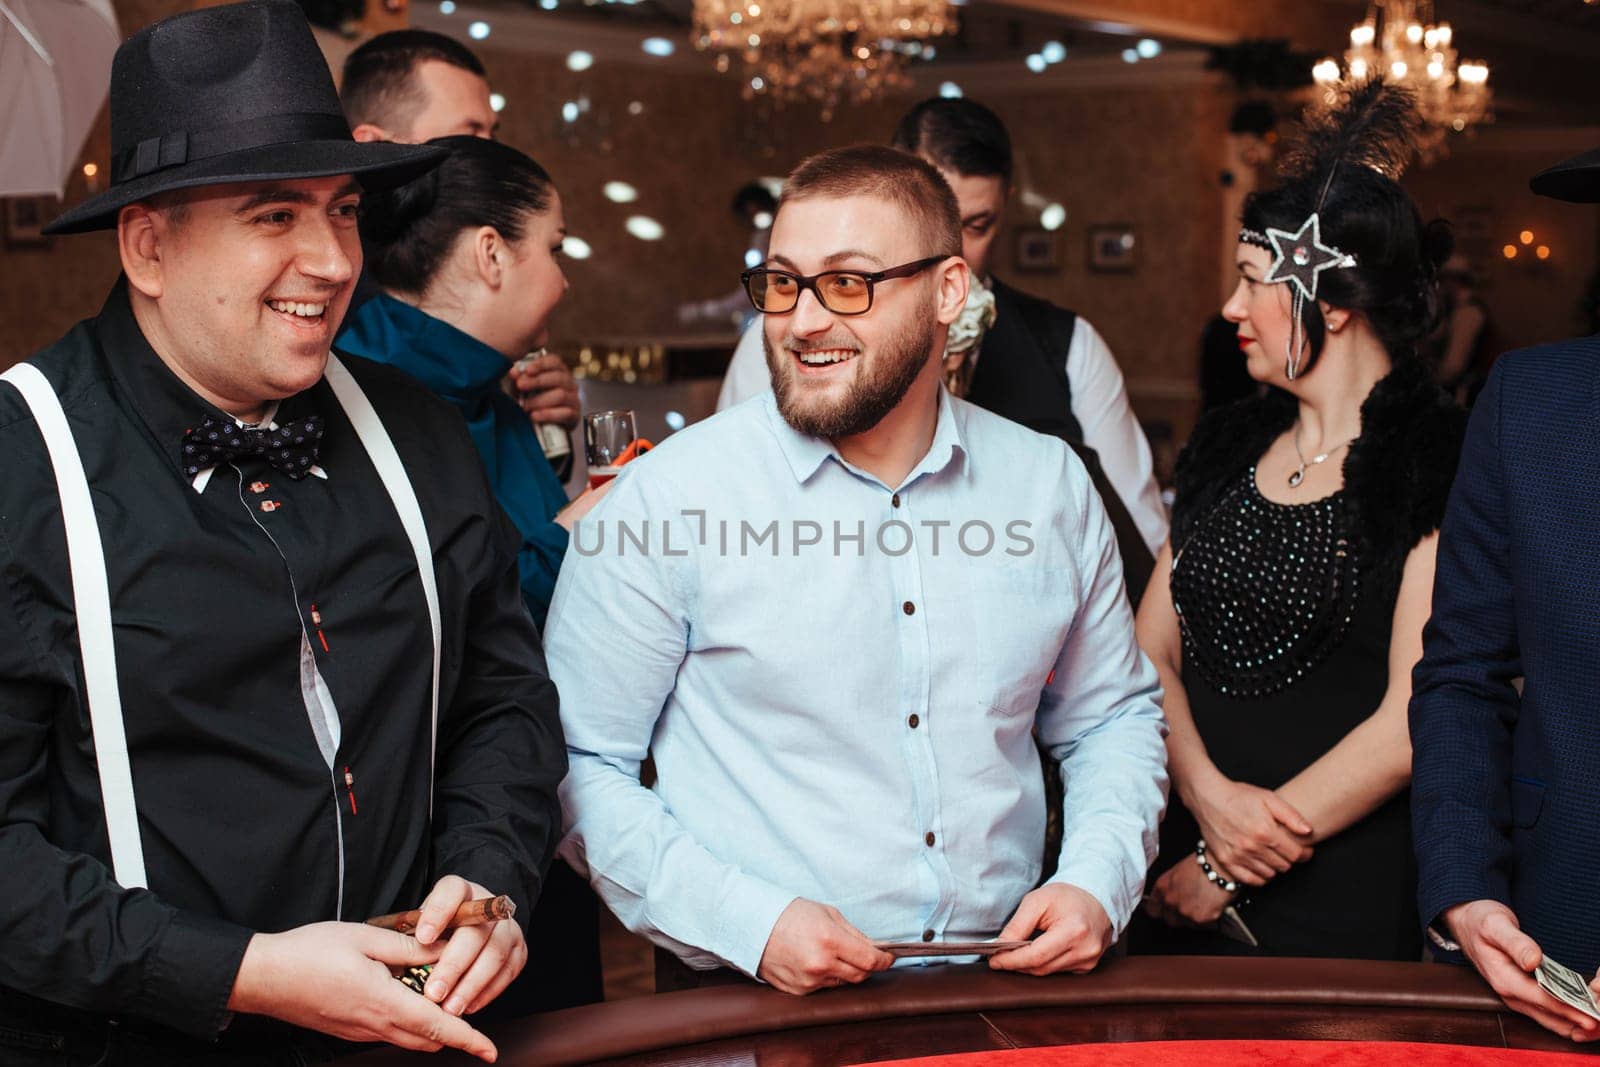 A group of people play in the casino on roulette. Yaremche, Bukovel, Ukraine - January 10, 2022